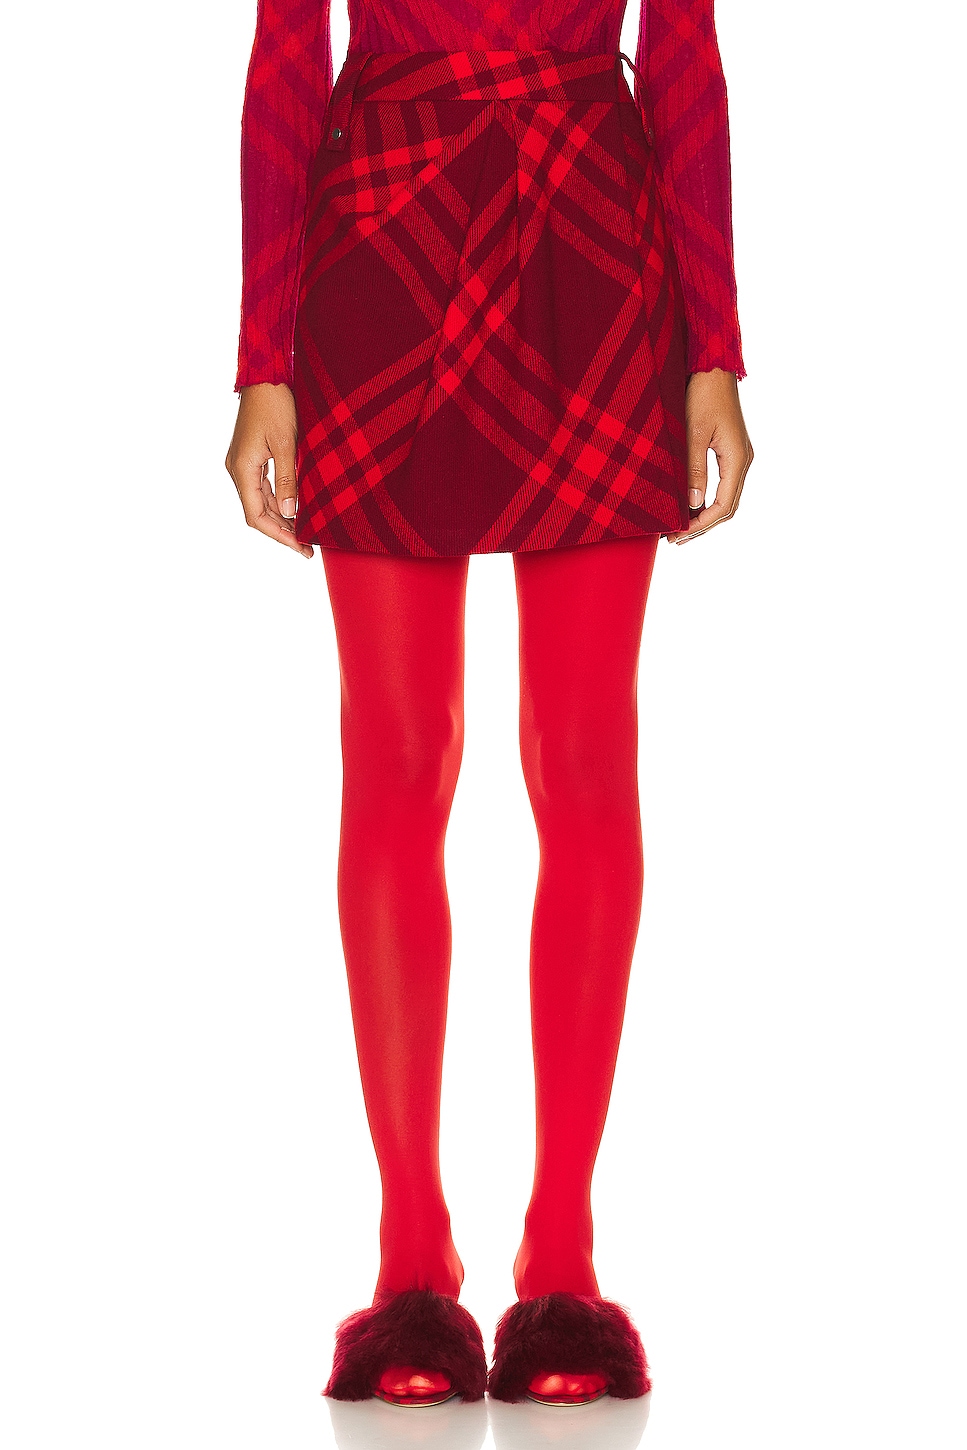 Image 1 of Burberry Check Mini Skirt in Ripple IP Check